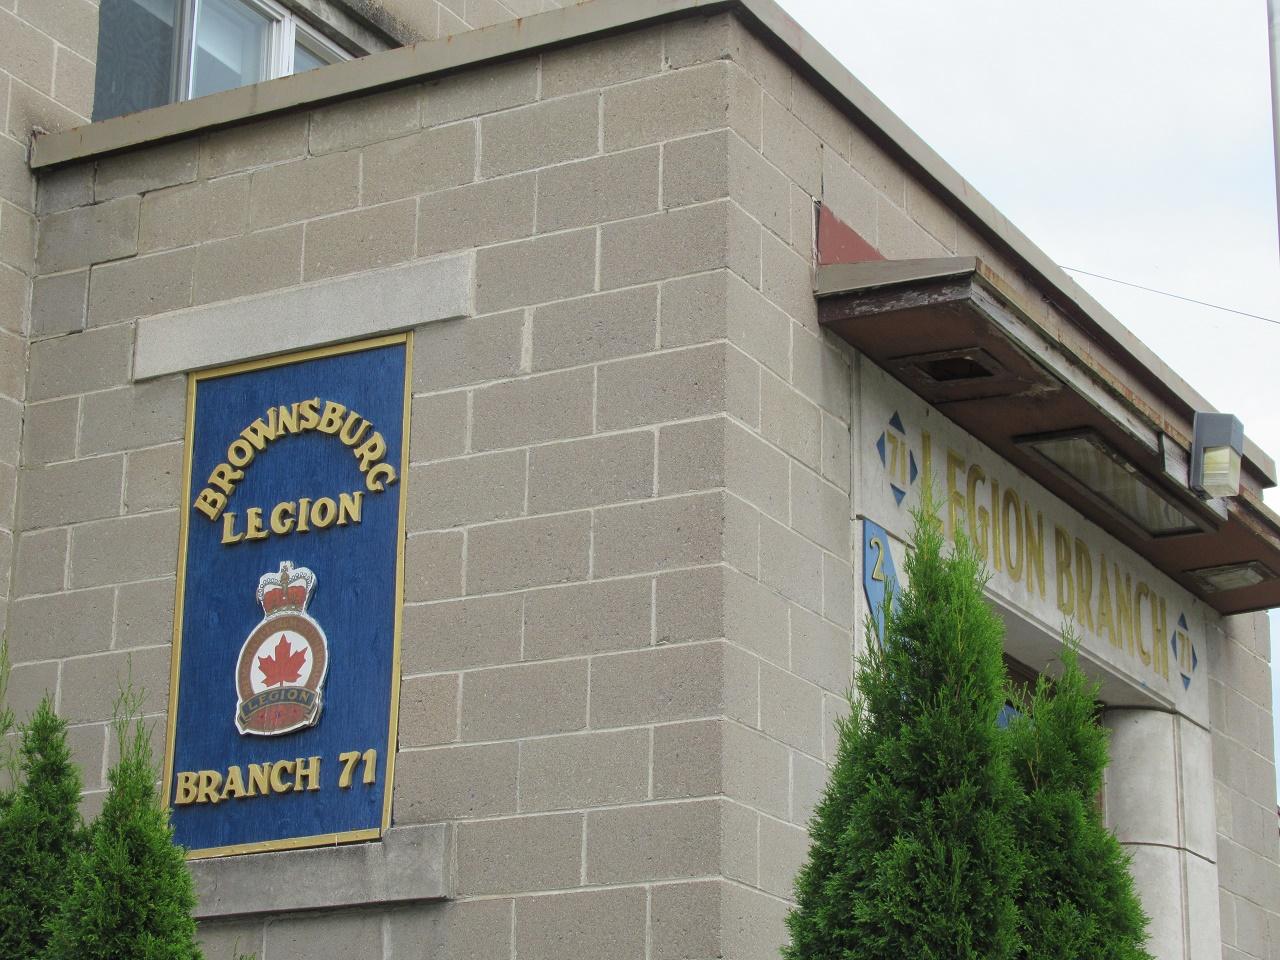 Legions and Knights of Columbus halls reopen with safety procedures in place